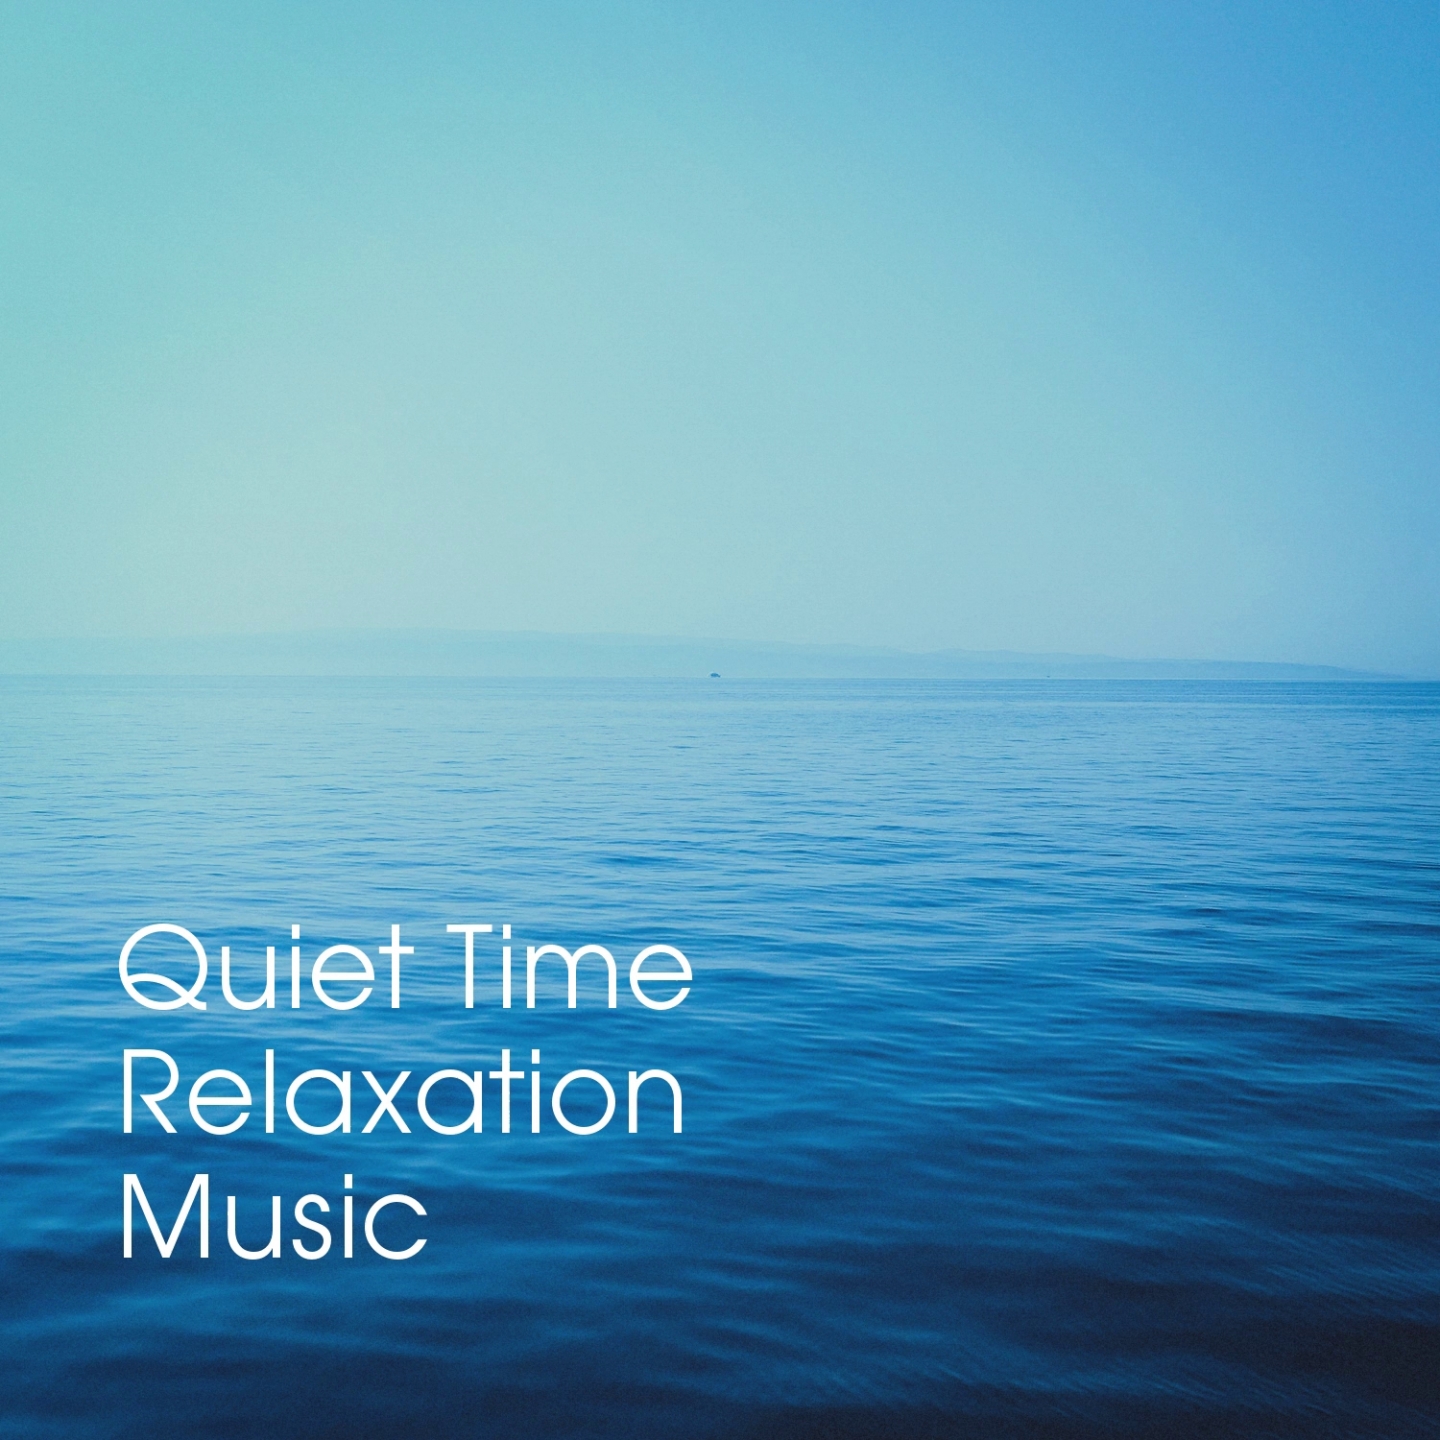 Quiet Time Relaxation Music